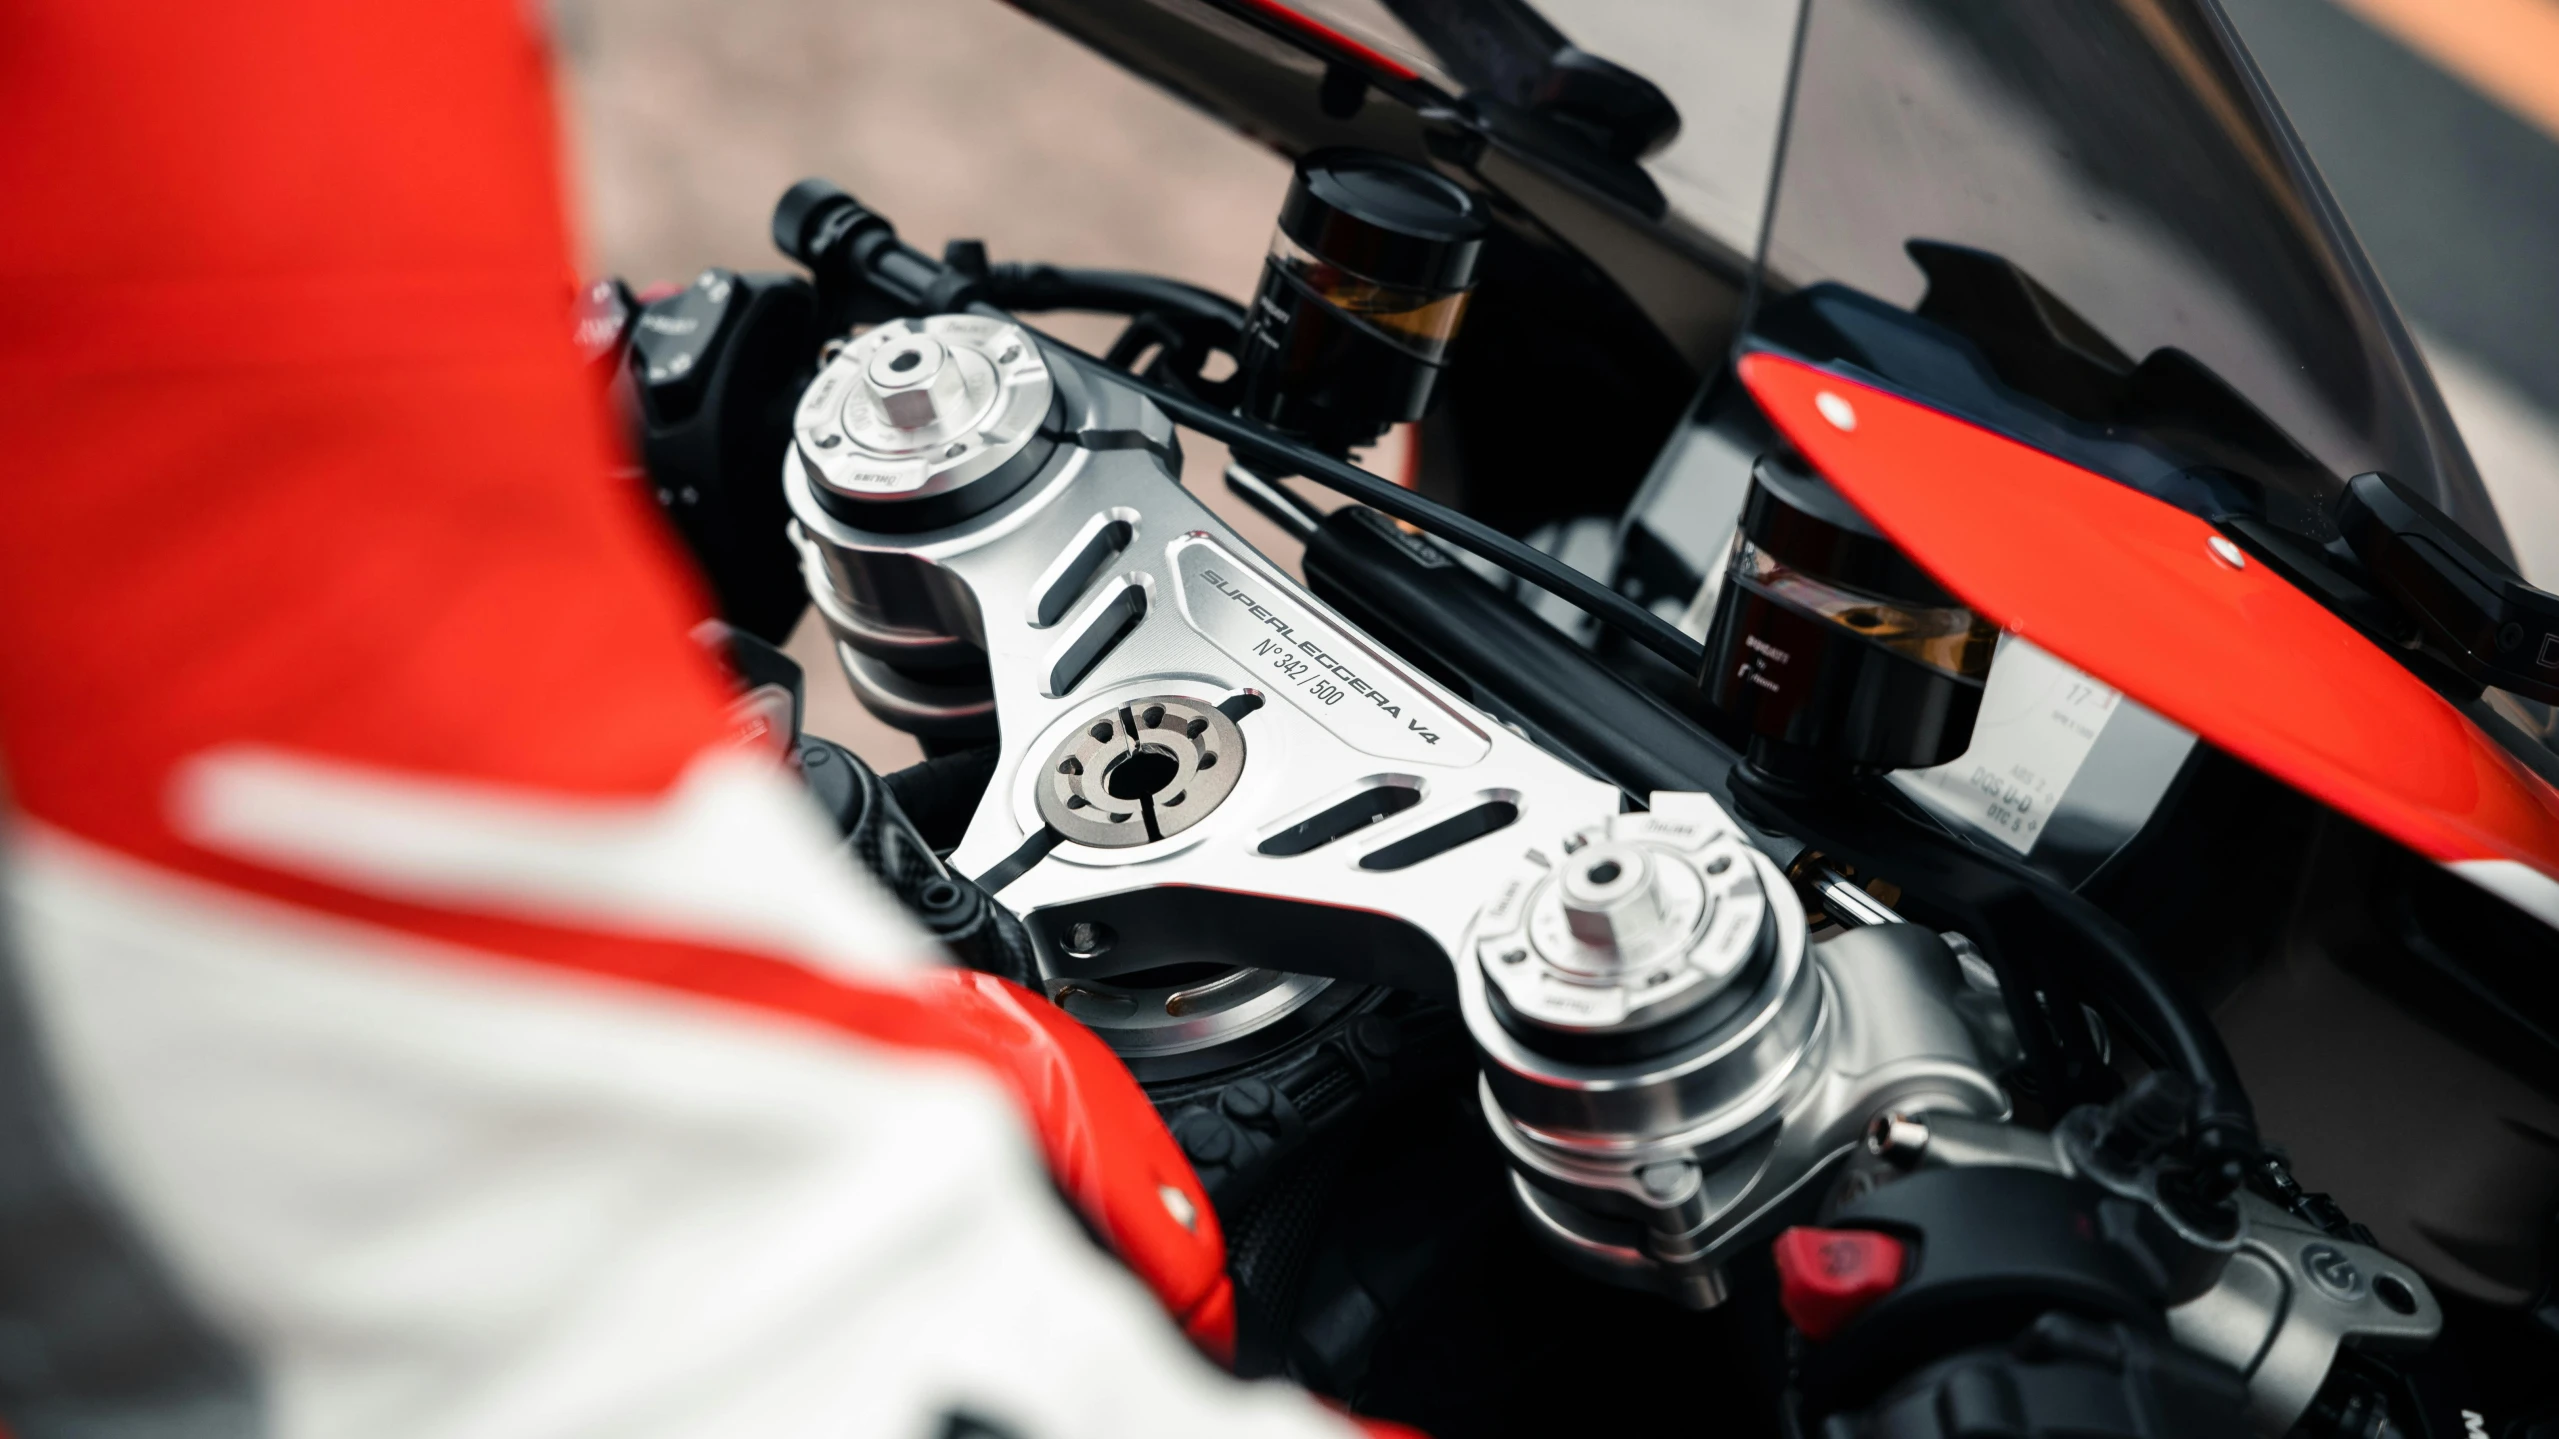 a close up of the engine of a motorcycle, inspired by Brian Dunlop, unsplash, silver white red details, fanatec peripherals, closeup of arms, formulae